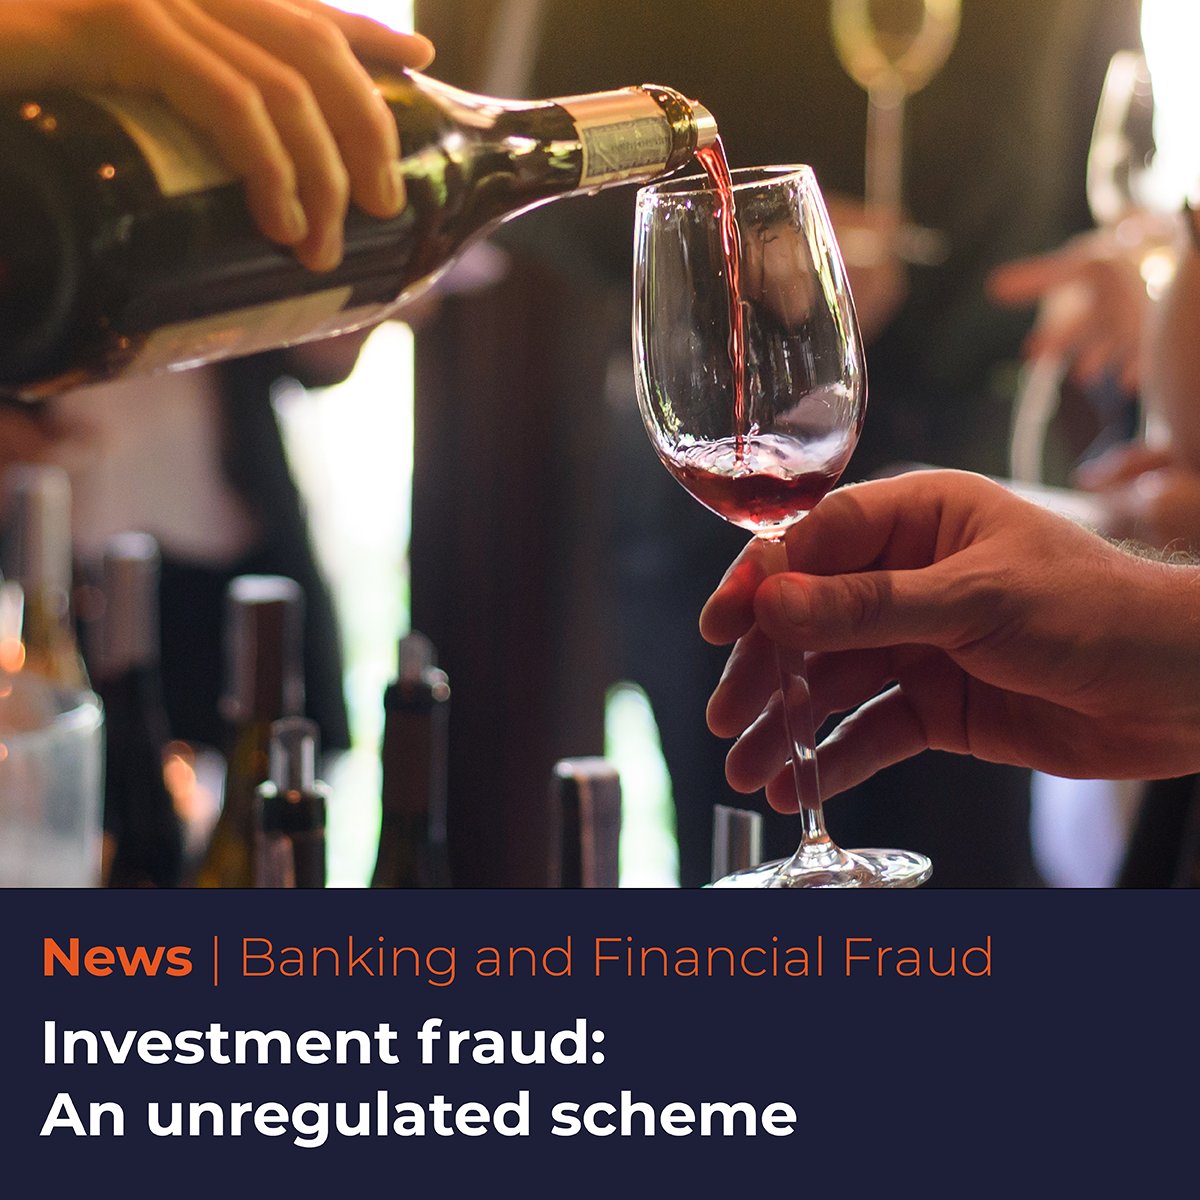 A wine merchant was charged for running an unregulated scheme in which investors were misled into thinking they were buying fine wines. Banking & Financial Fraud Consultant Ali Twidale takes a closer look: ttps://loom.ly/-1PGH3s

#investmentfraud #investorrisk #investmentscheme